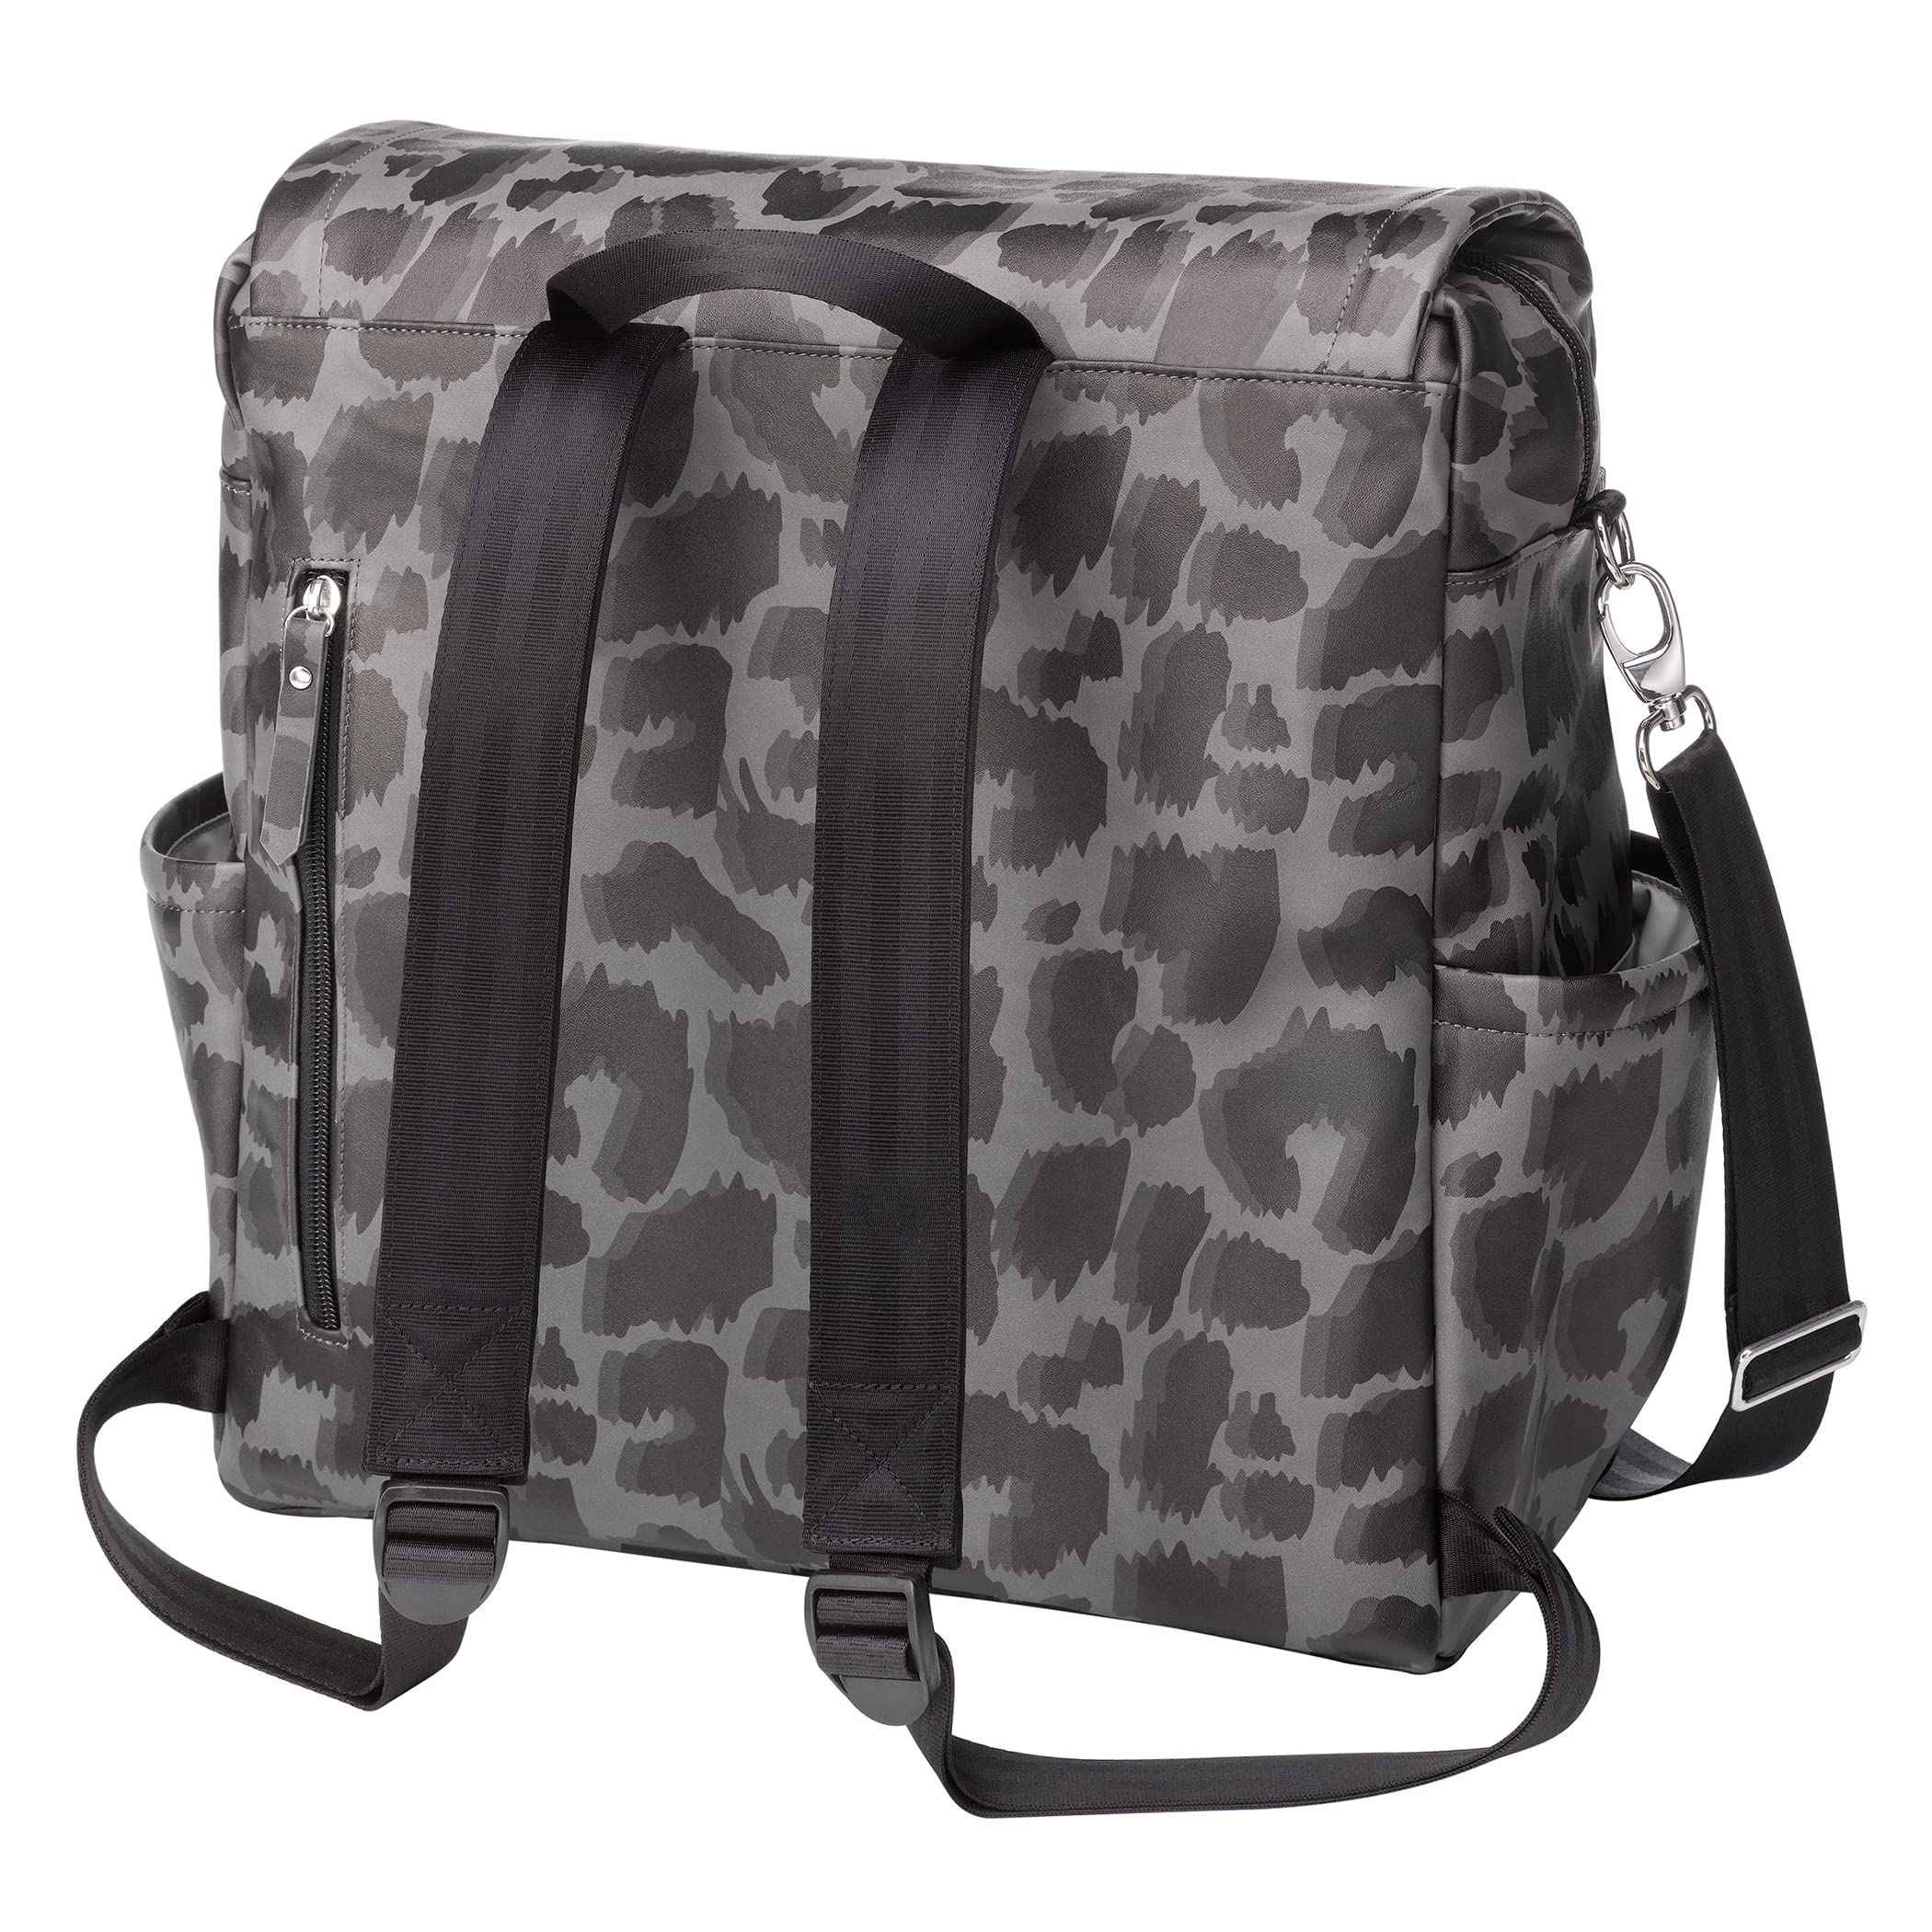 Petunia Pickle Bottom Boxy Backpack | Diaper Bag | Diaper Bag Backpack for Parents | Top-Selling Stylish Baby Bag | Sophisticated and Spacious Backpack for On The Go Moms | Shadow Leopard